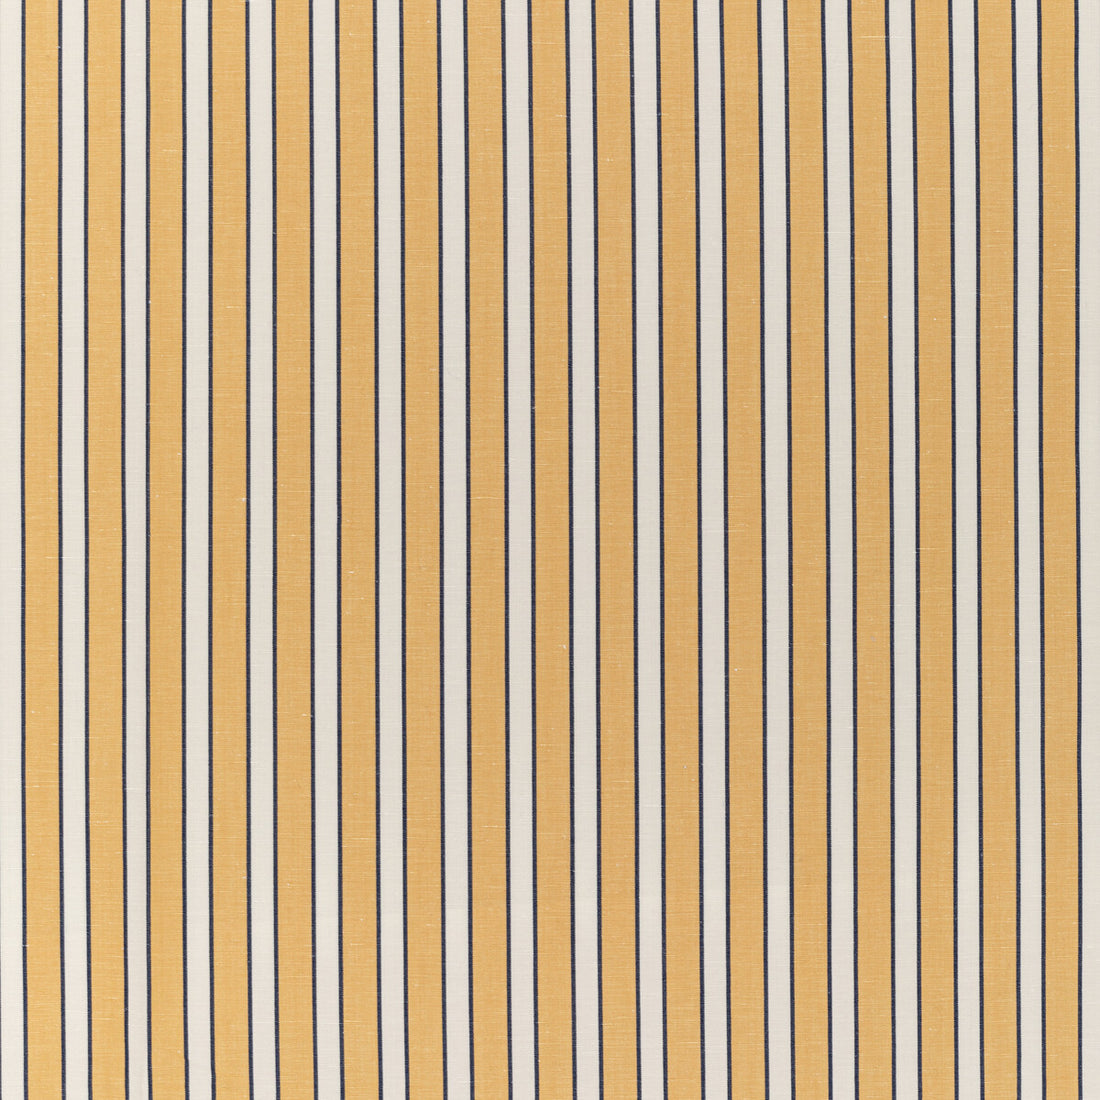 Rouen Stripe fabric in yellow color - pattern 8022117.450.0 - by Brunschwig &amp; Fils in the Normant Checks And Stripes II collection